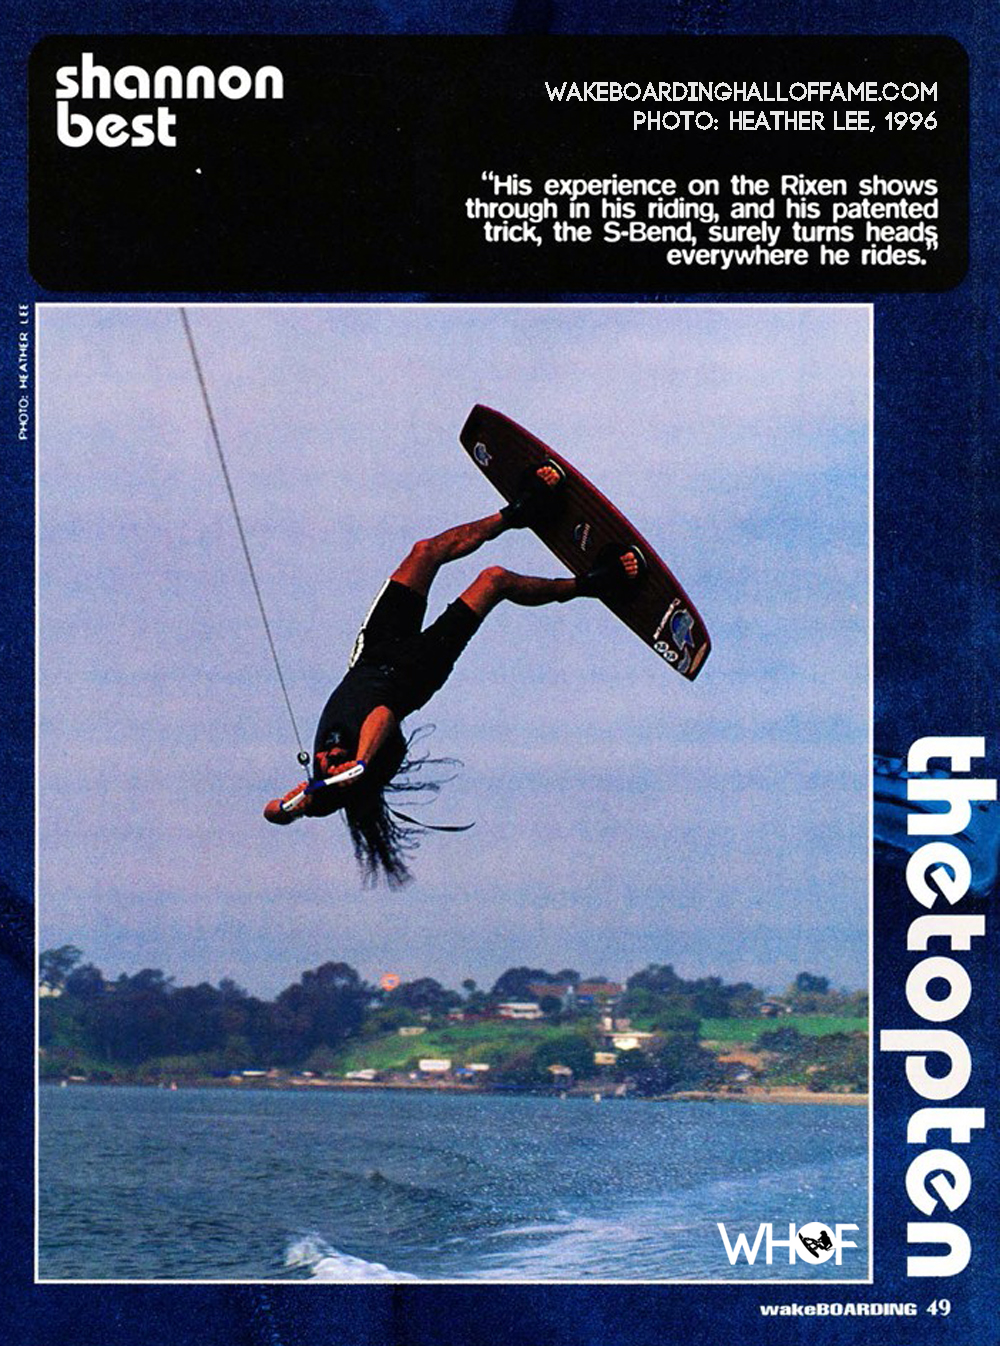 Shannon Best Top 10 Wakeboarder, 1996. S-Bend photo by Heather Lee